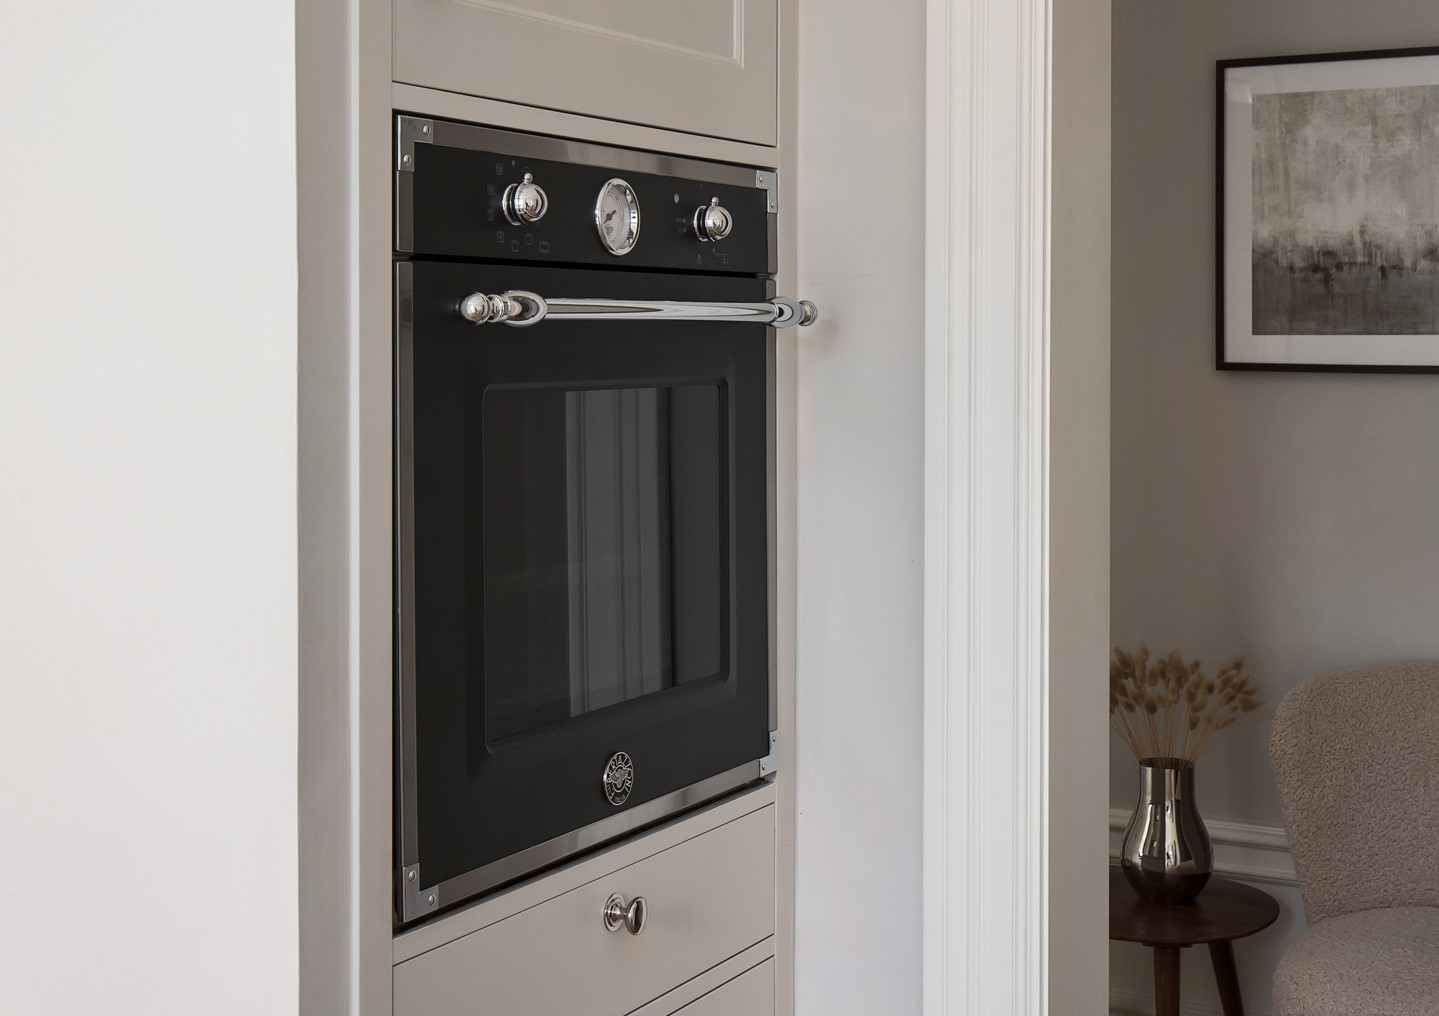 A Touch of Tradition With The Heritage Series Built-in Oven